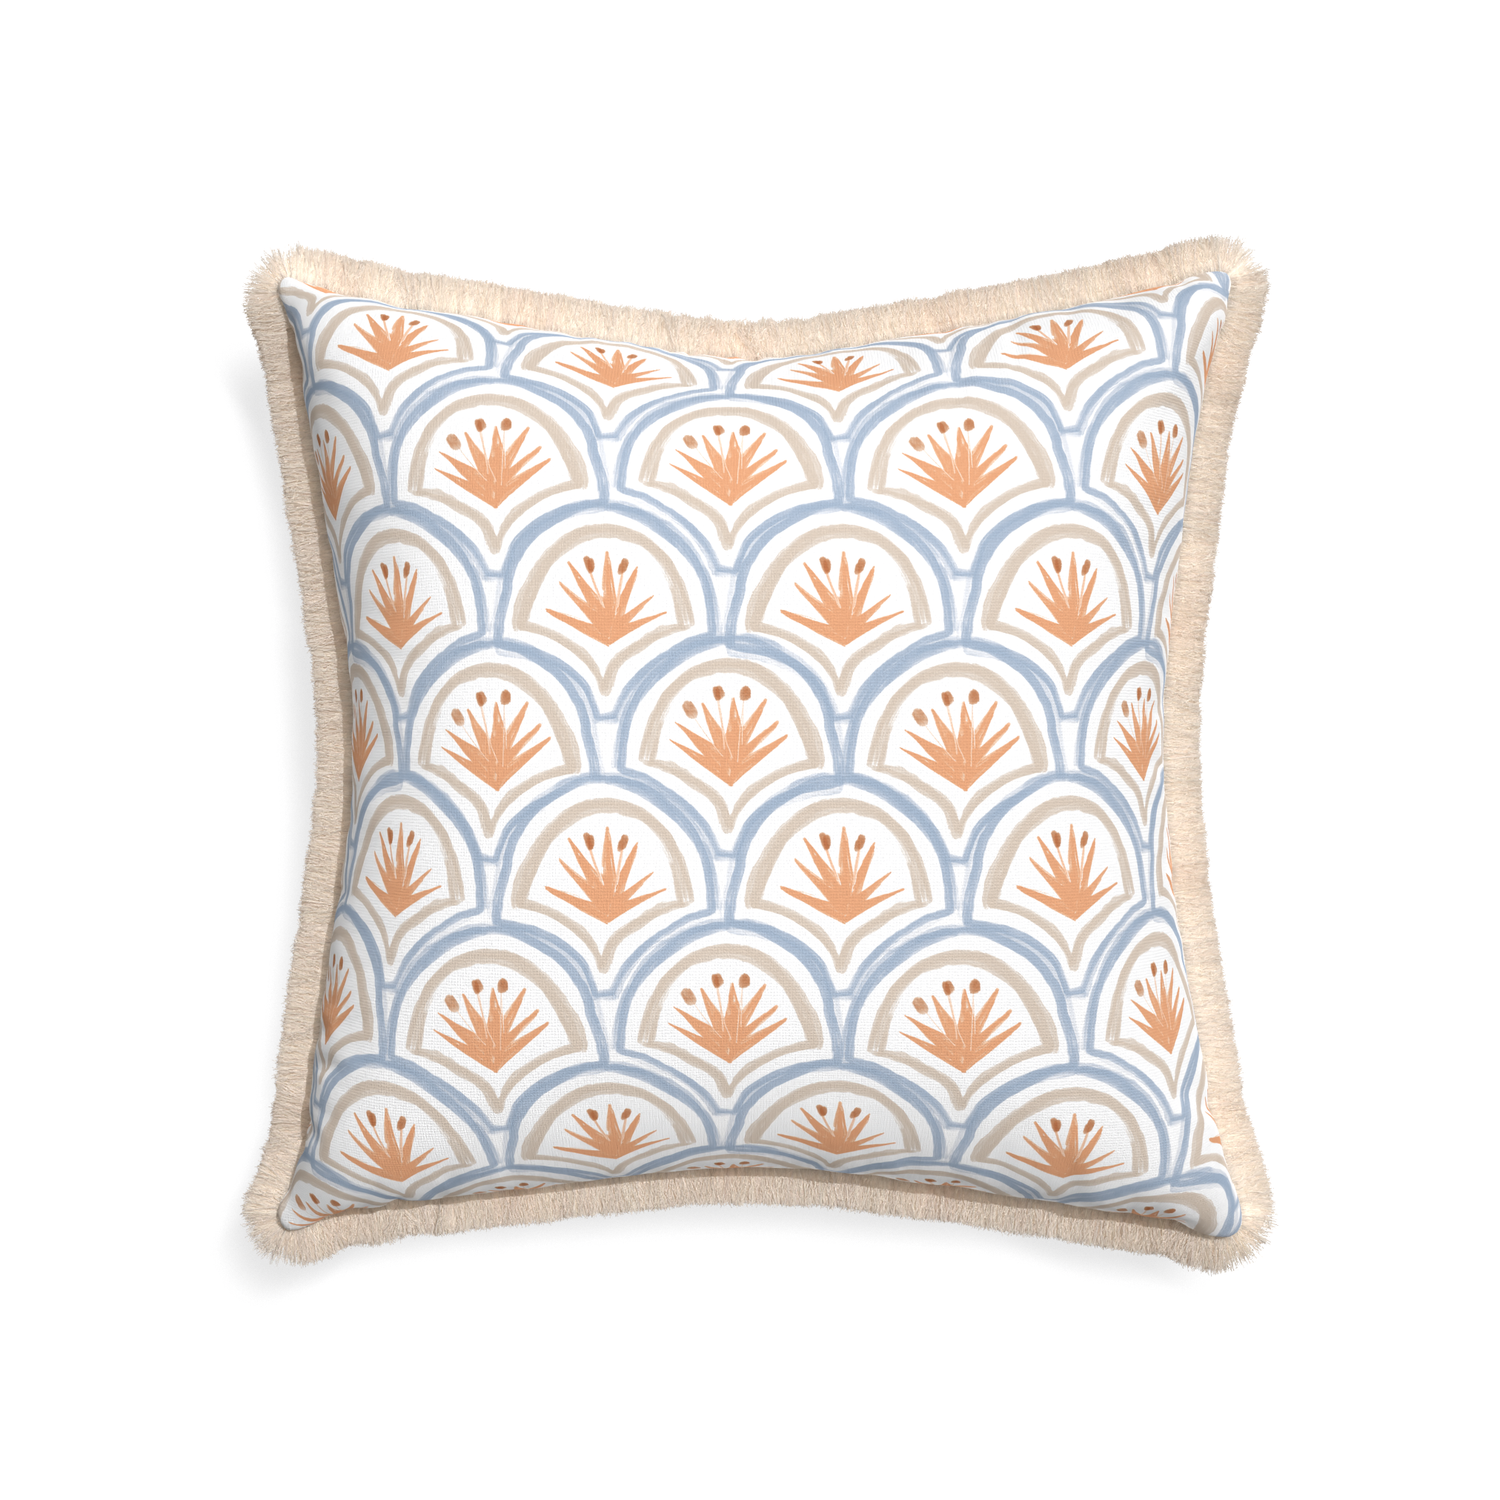 22-square thatcher apricot custom art deco palm patternpillow with cream fringe on white background